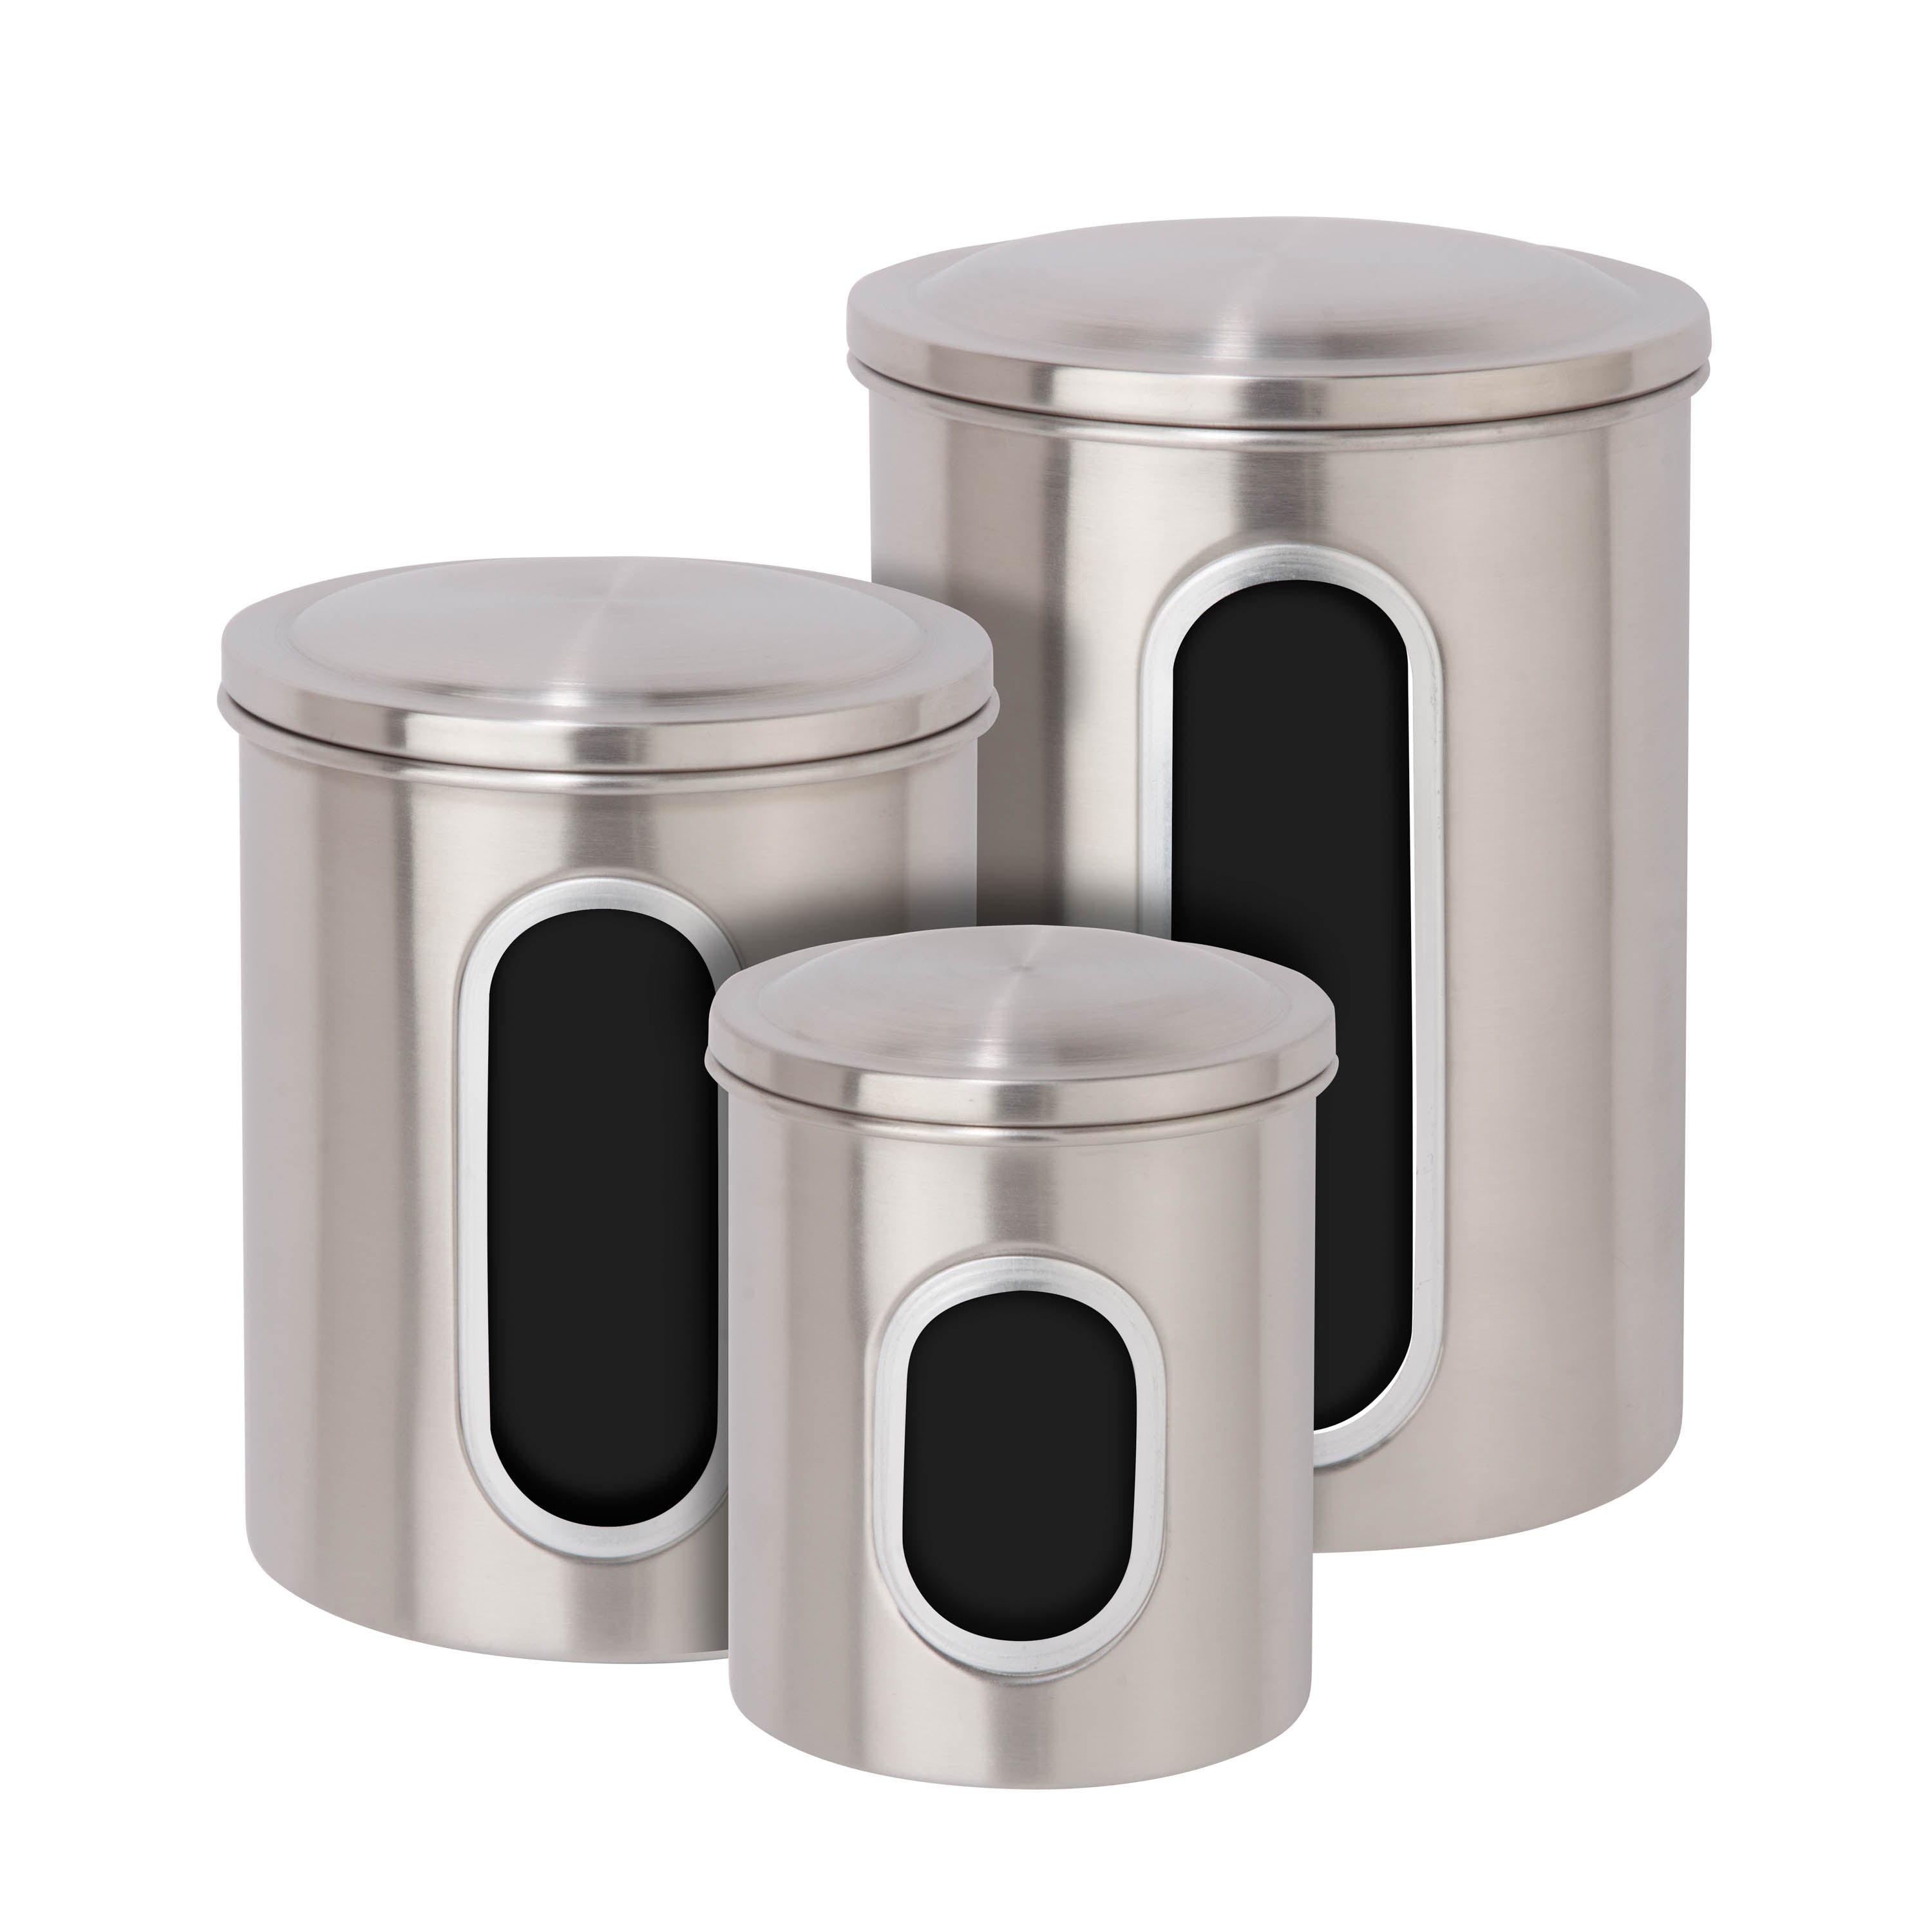  Zopeal 8 Pack Kitchen Canister Set Stainless Steel